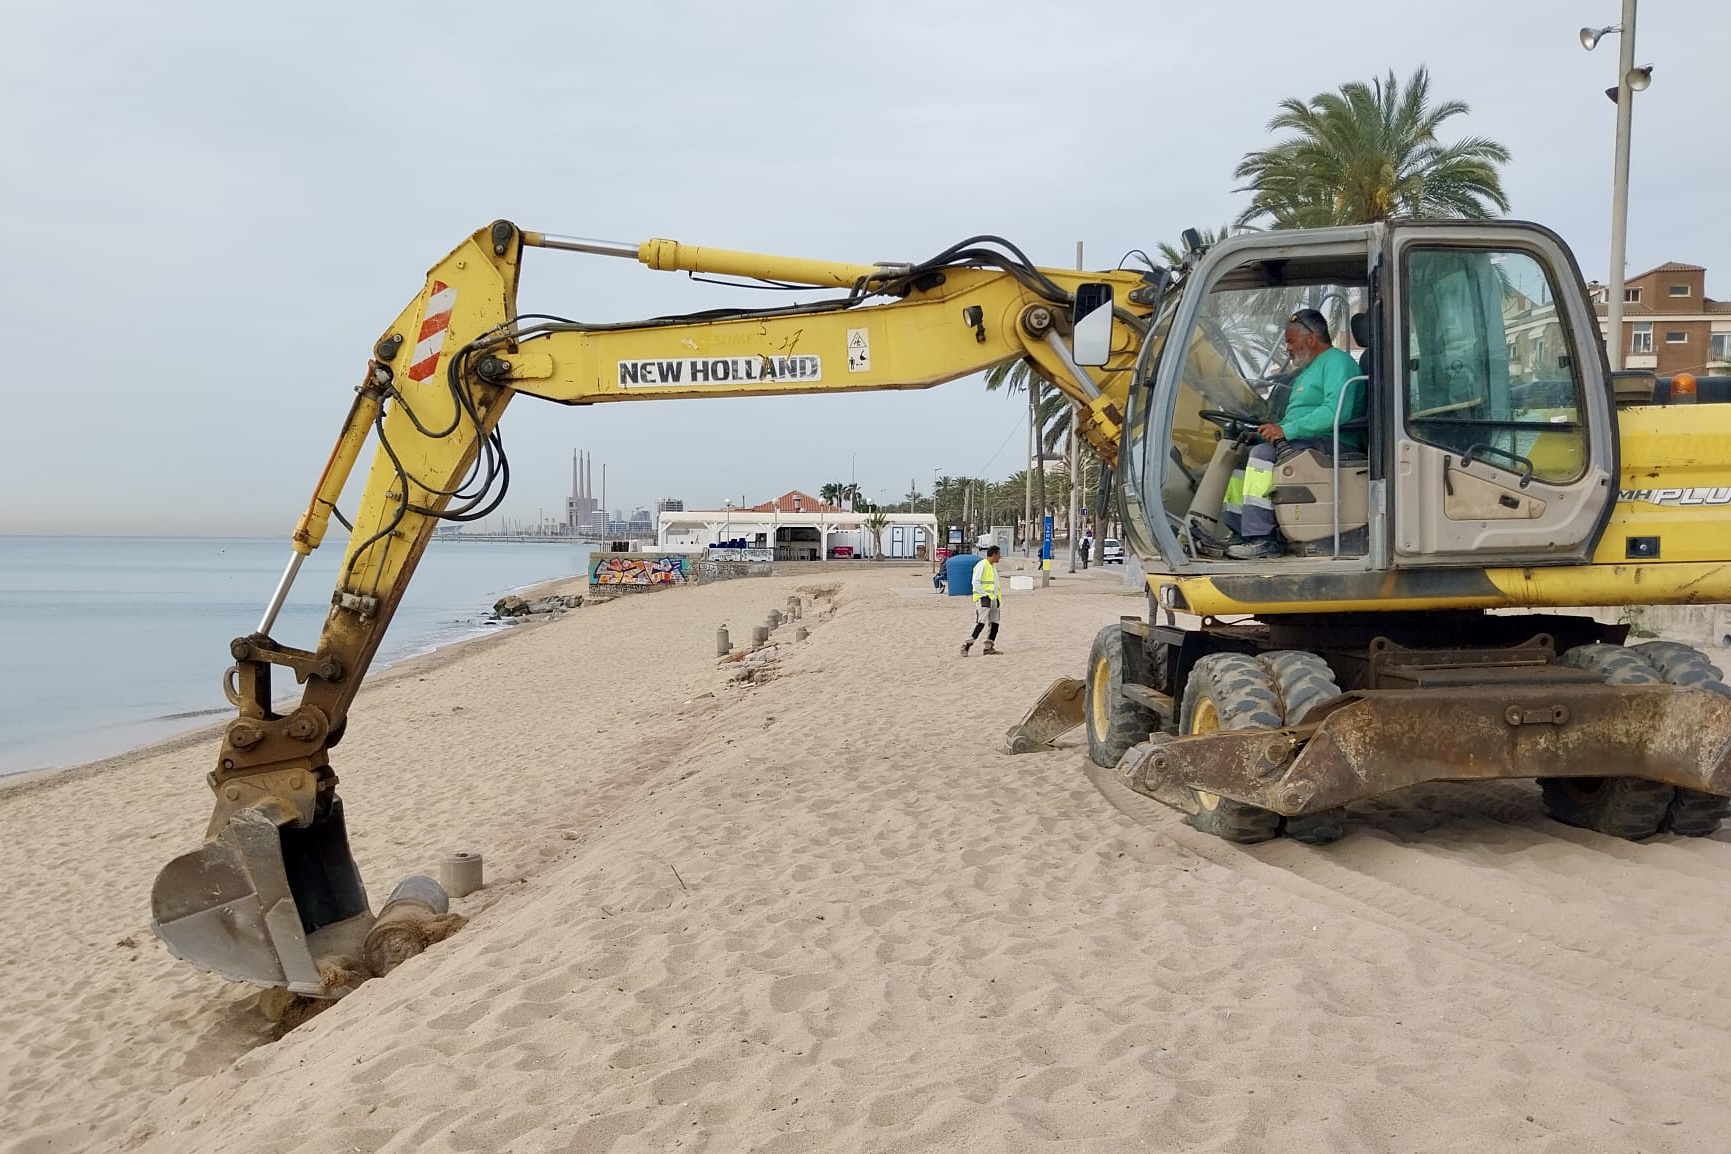 Works to remove structures that became visible on Badalona beach following Easter's Storm Nelson